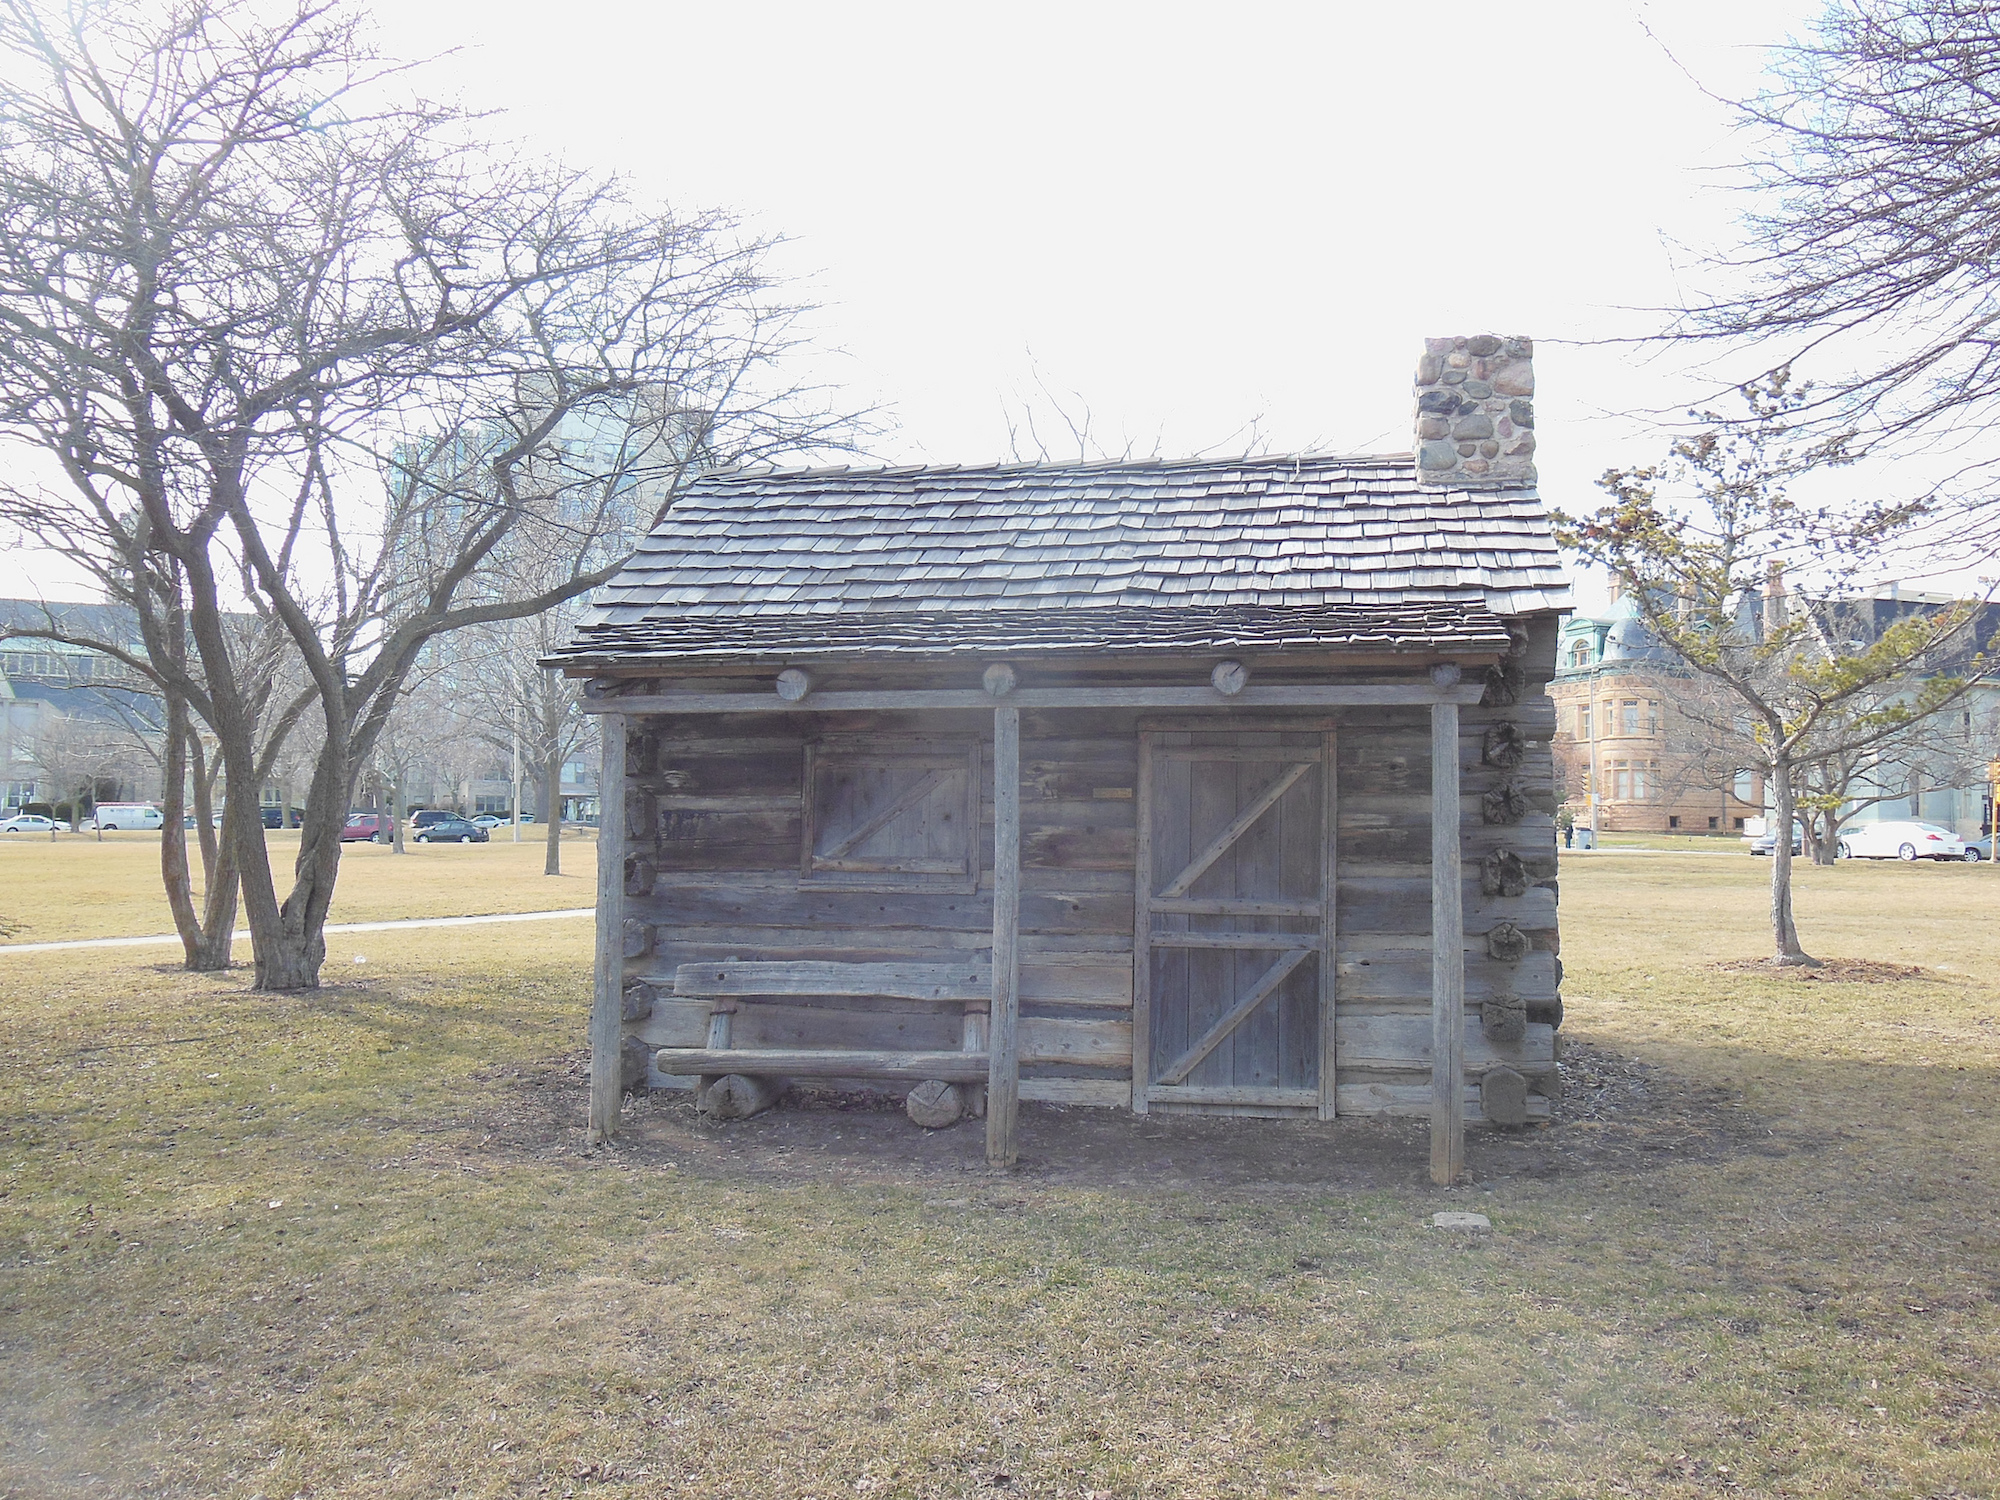 Initially constructed in 1947 and restored in 2007, this replica of French fur trader and Milwaukee co-founder Solomon Juneau's cabin is located in Juneau Park.